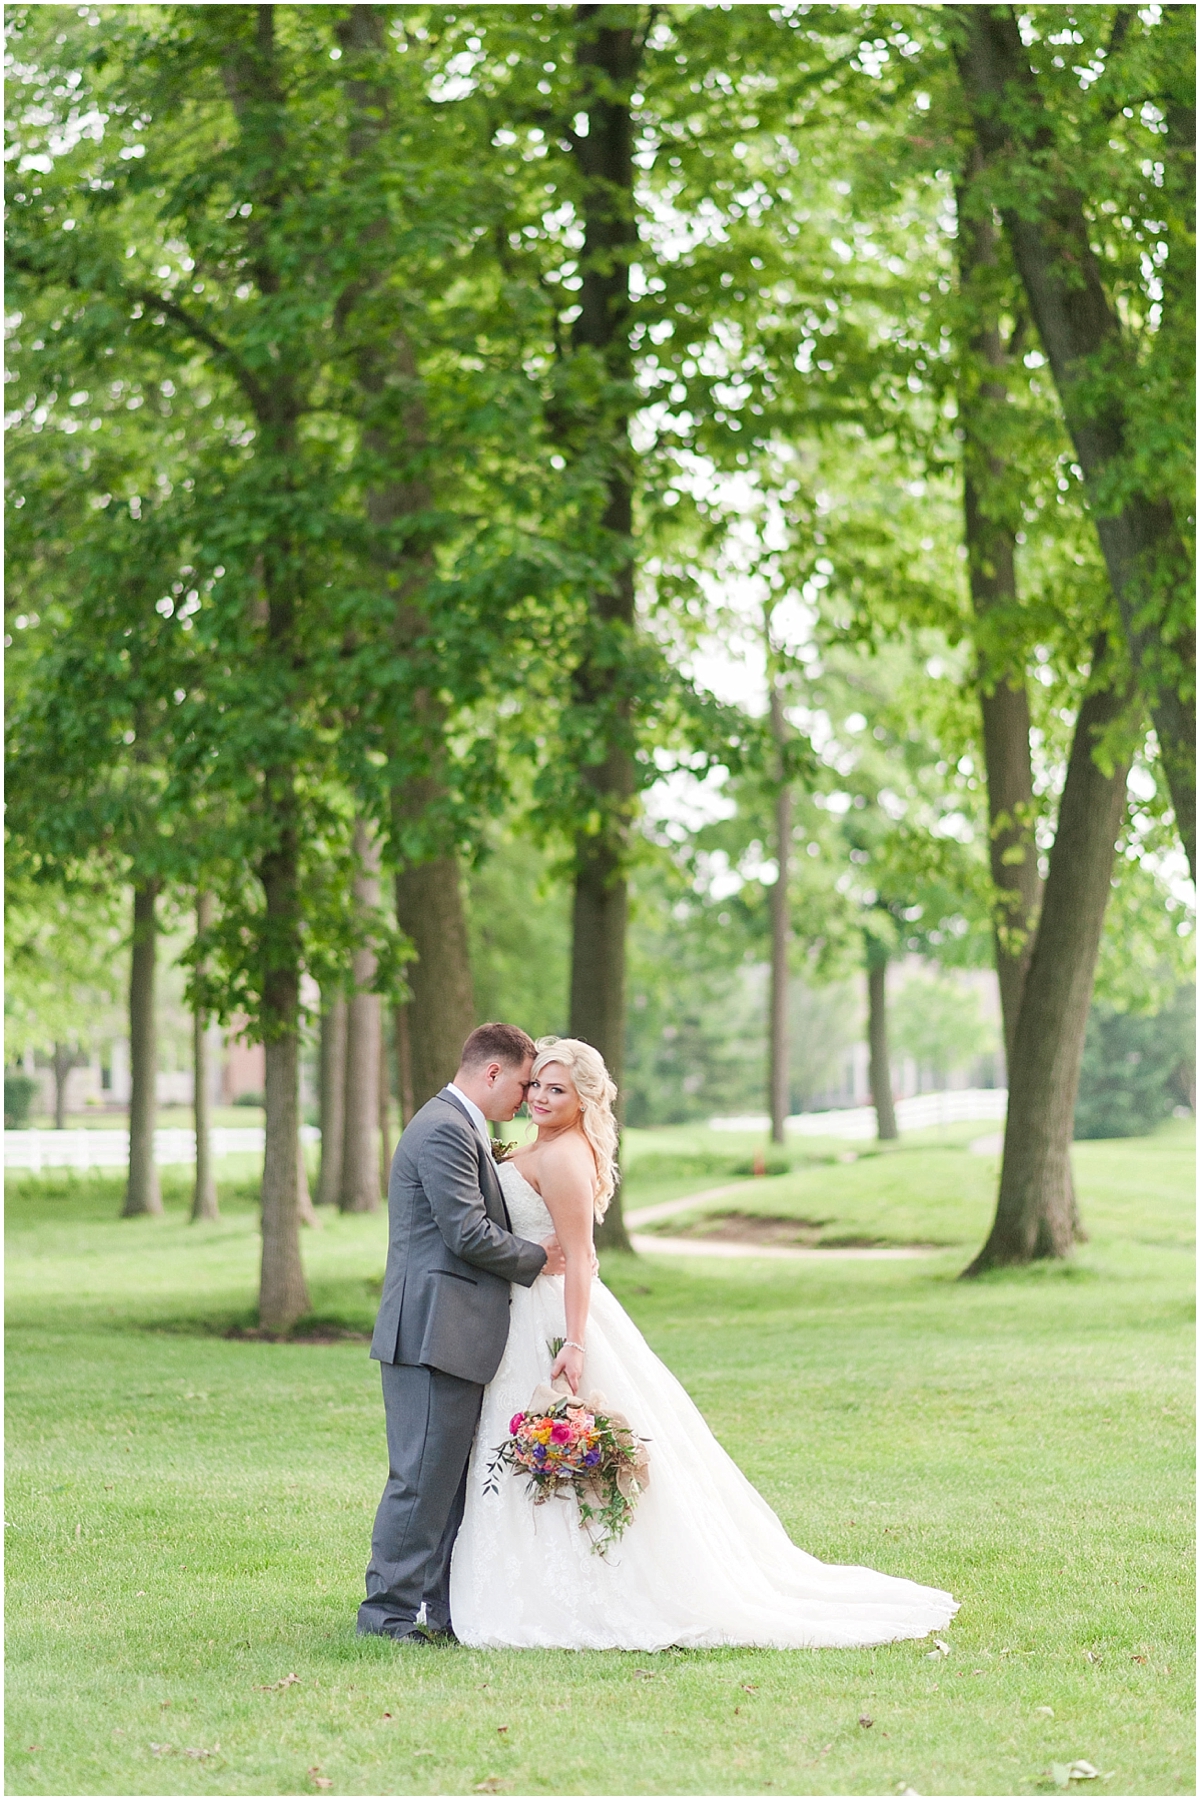 Heritage Golf Club Wedding Hilliard Ohio elegant wine inspired outdoor bride and groom portraits on a golf course Hilliard ohio wedding photographer pipers photography